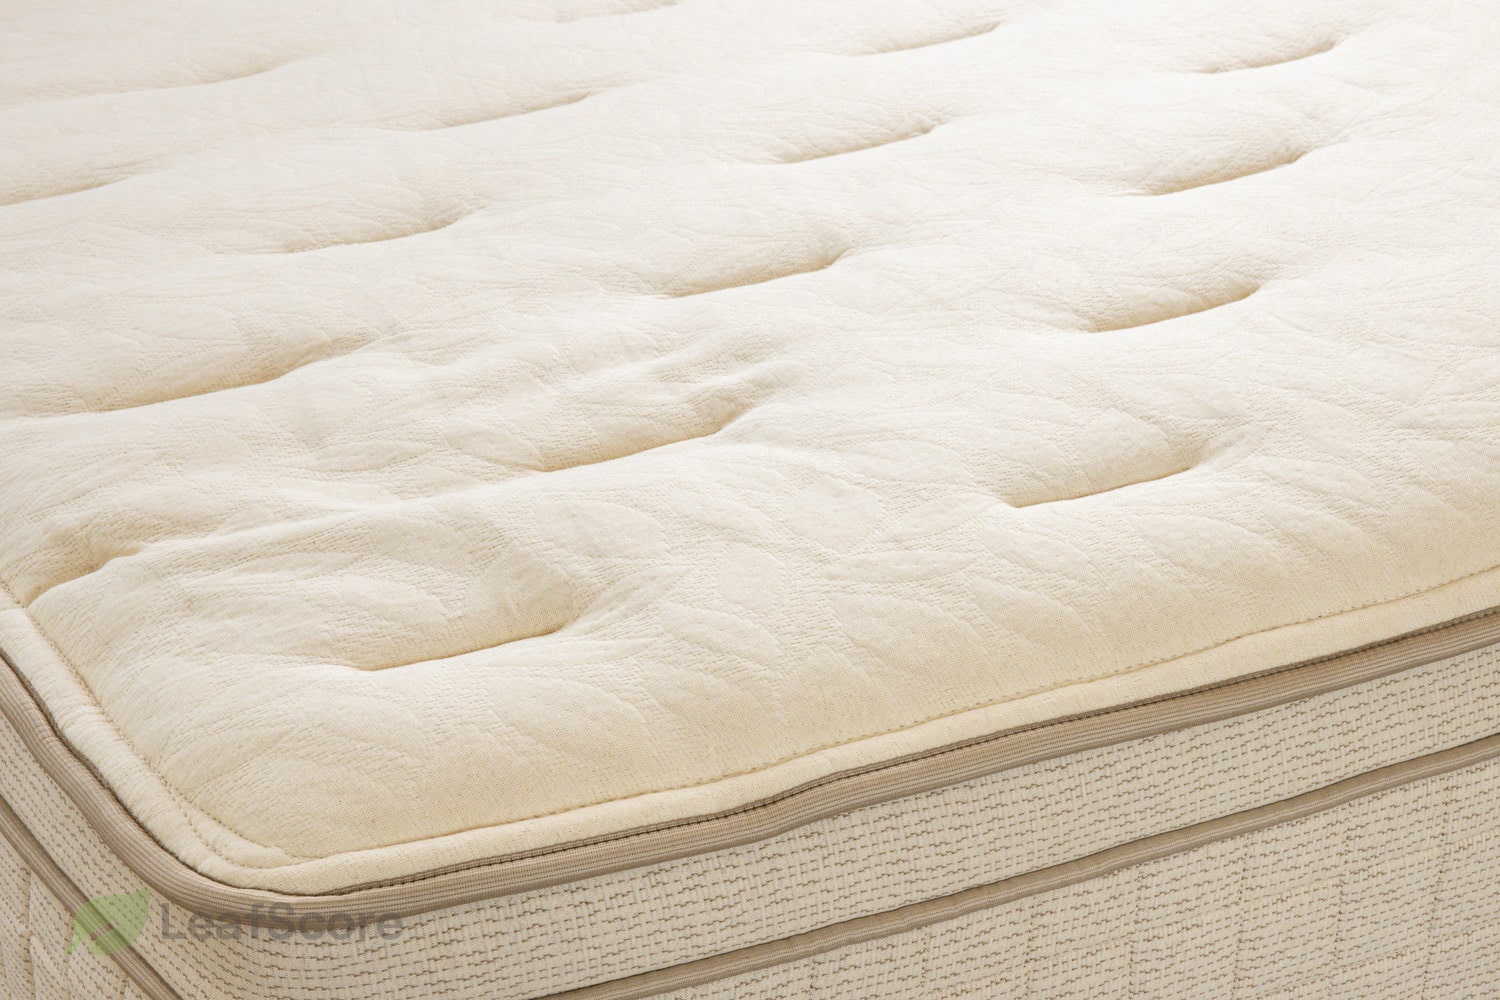 The Best Natural Mattress Materials Explained LeafScore LeafScore